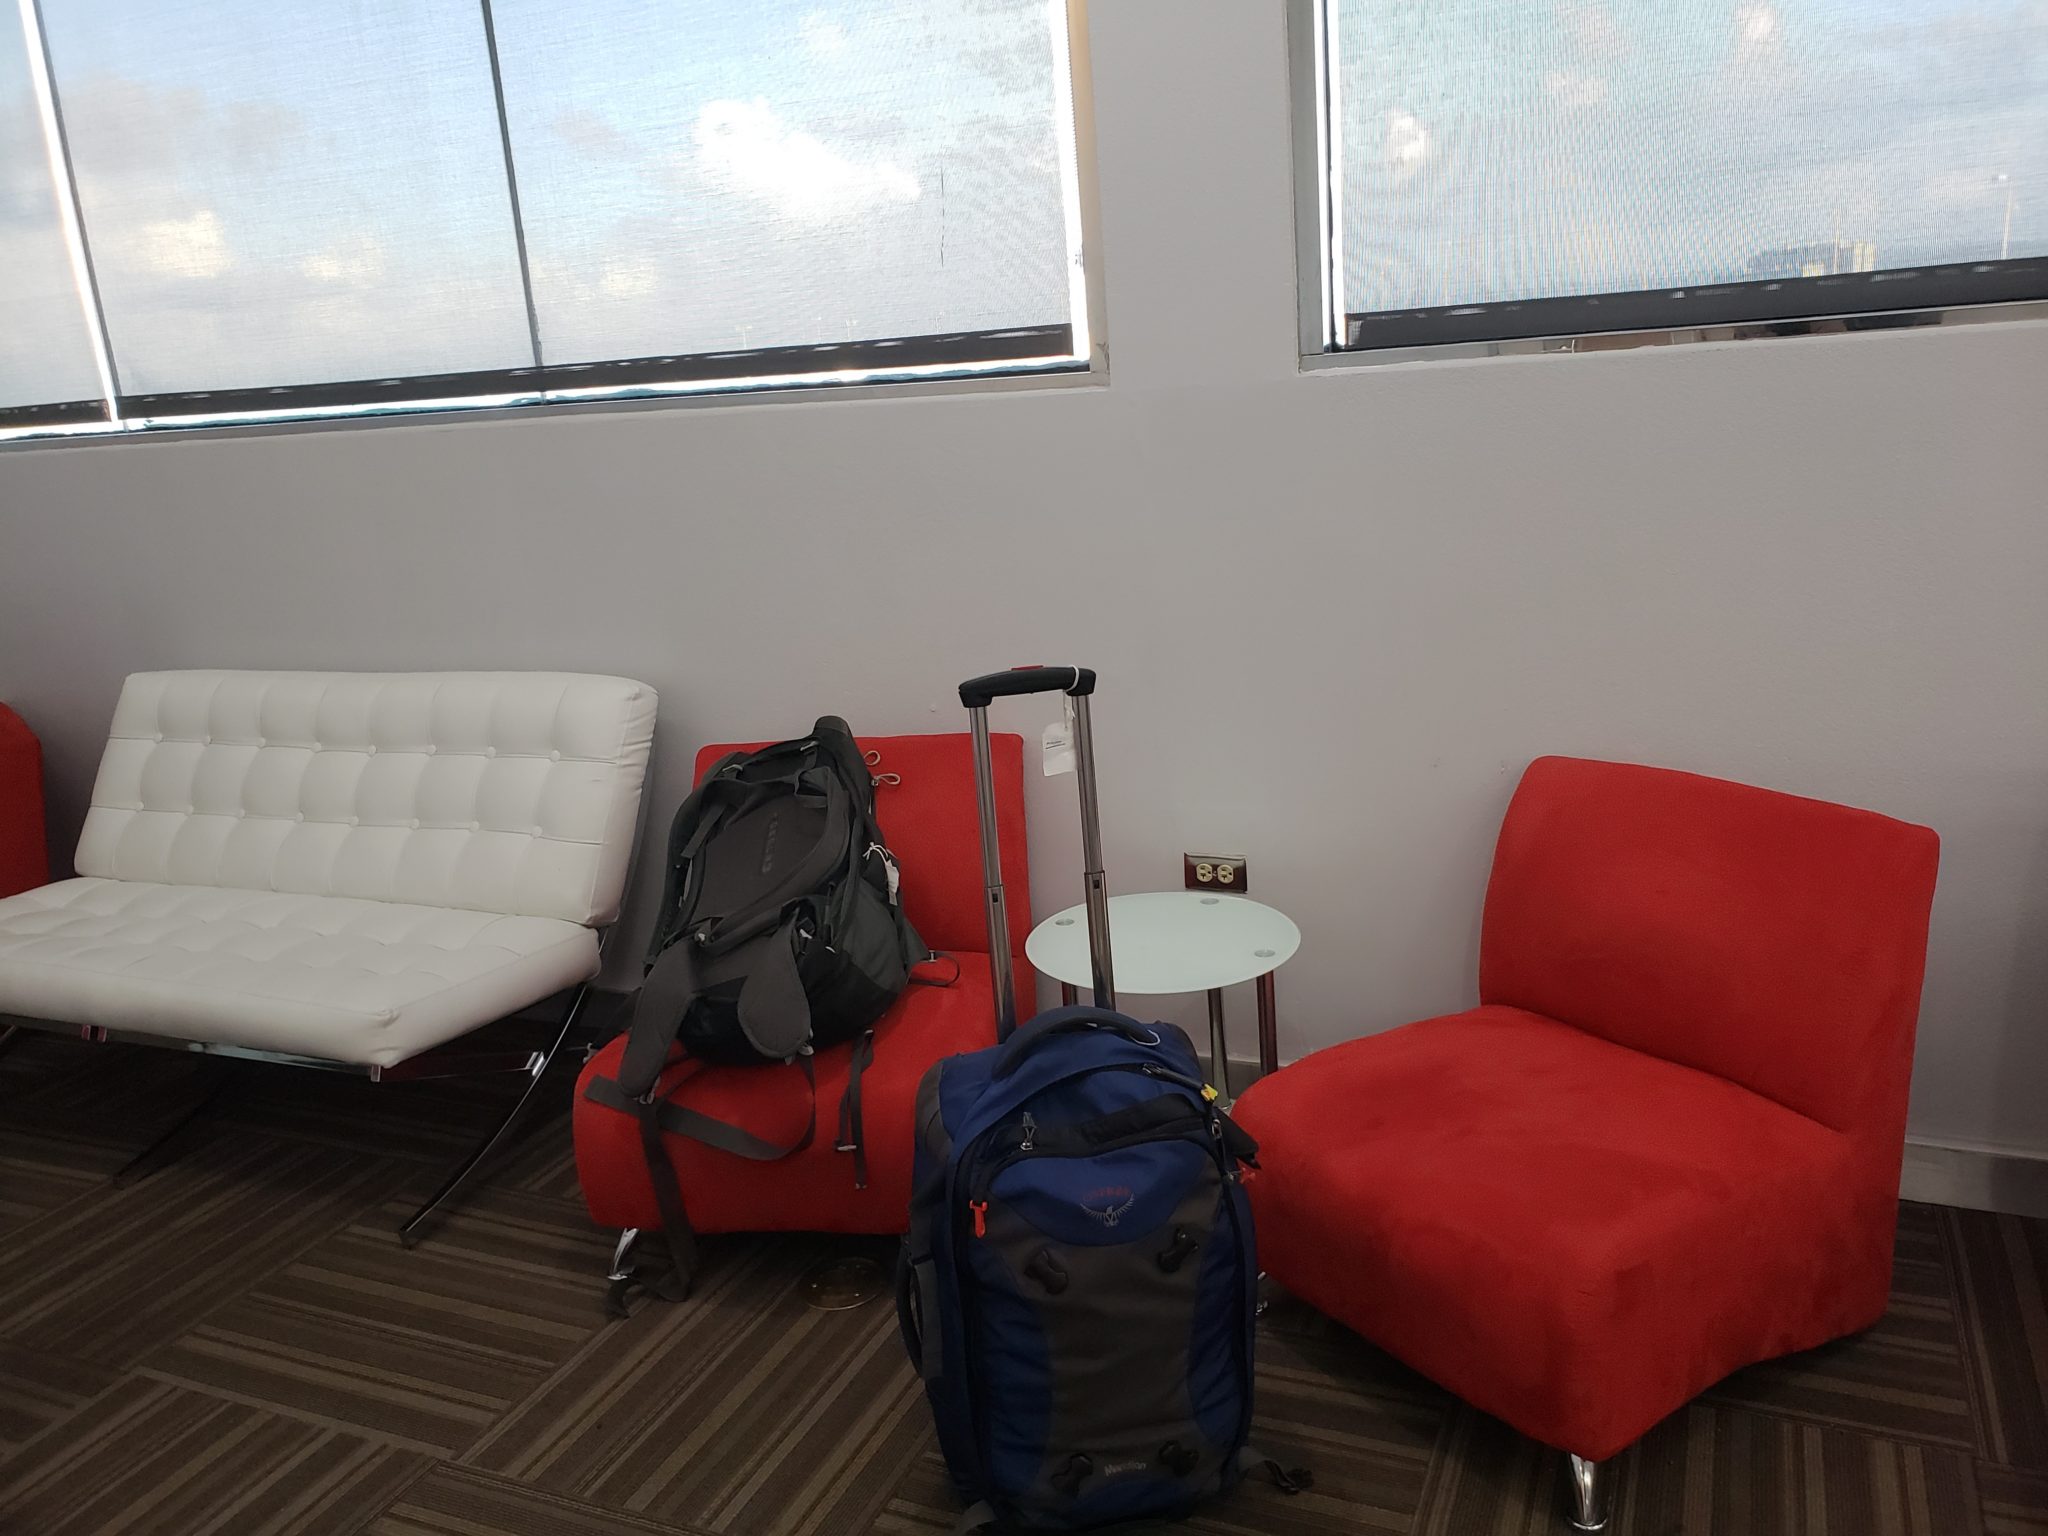 a red chair and luggage in a room